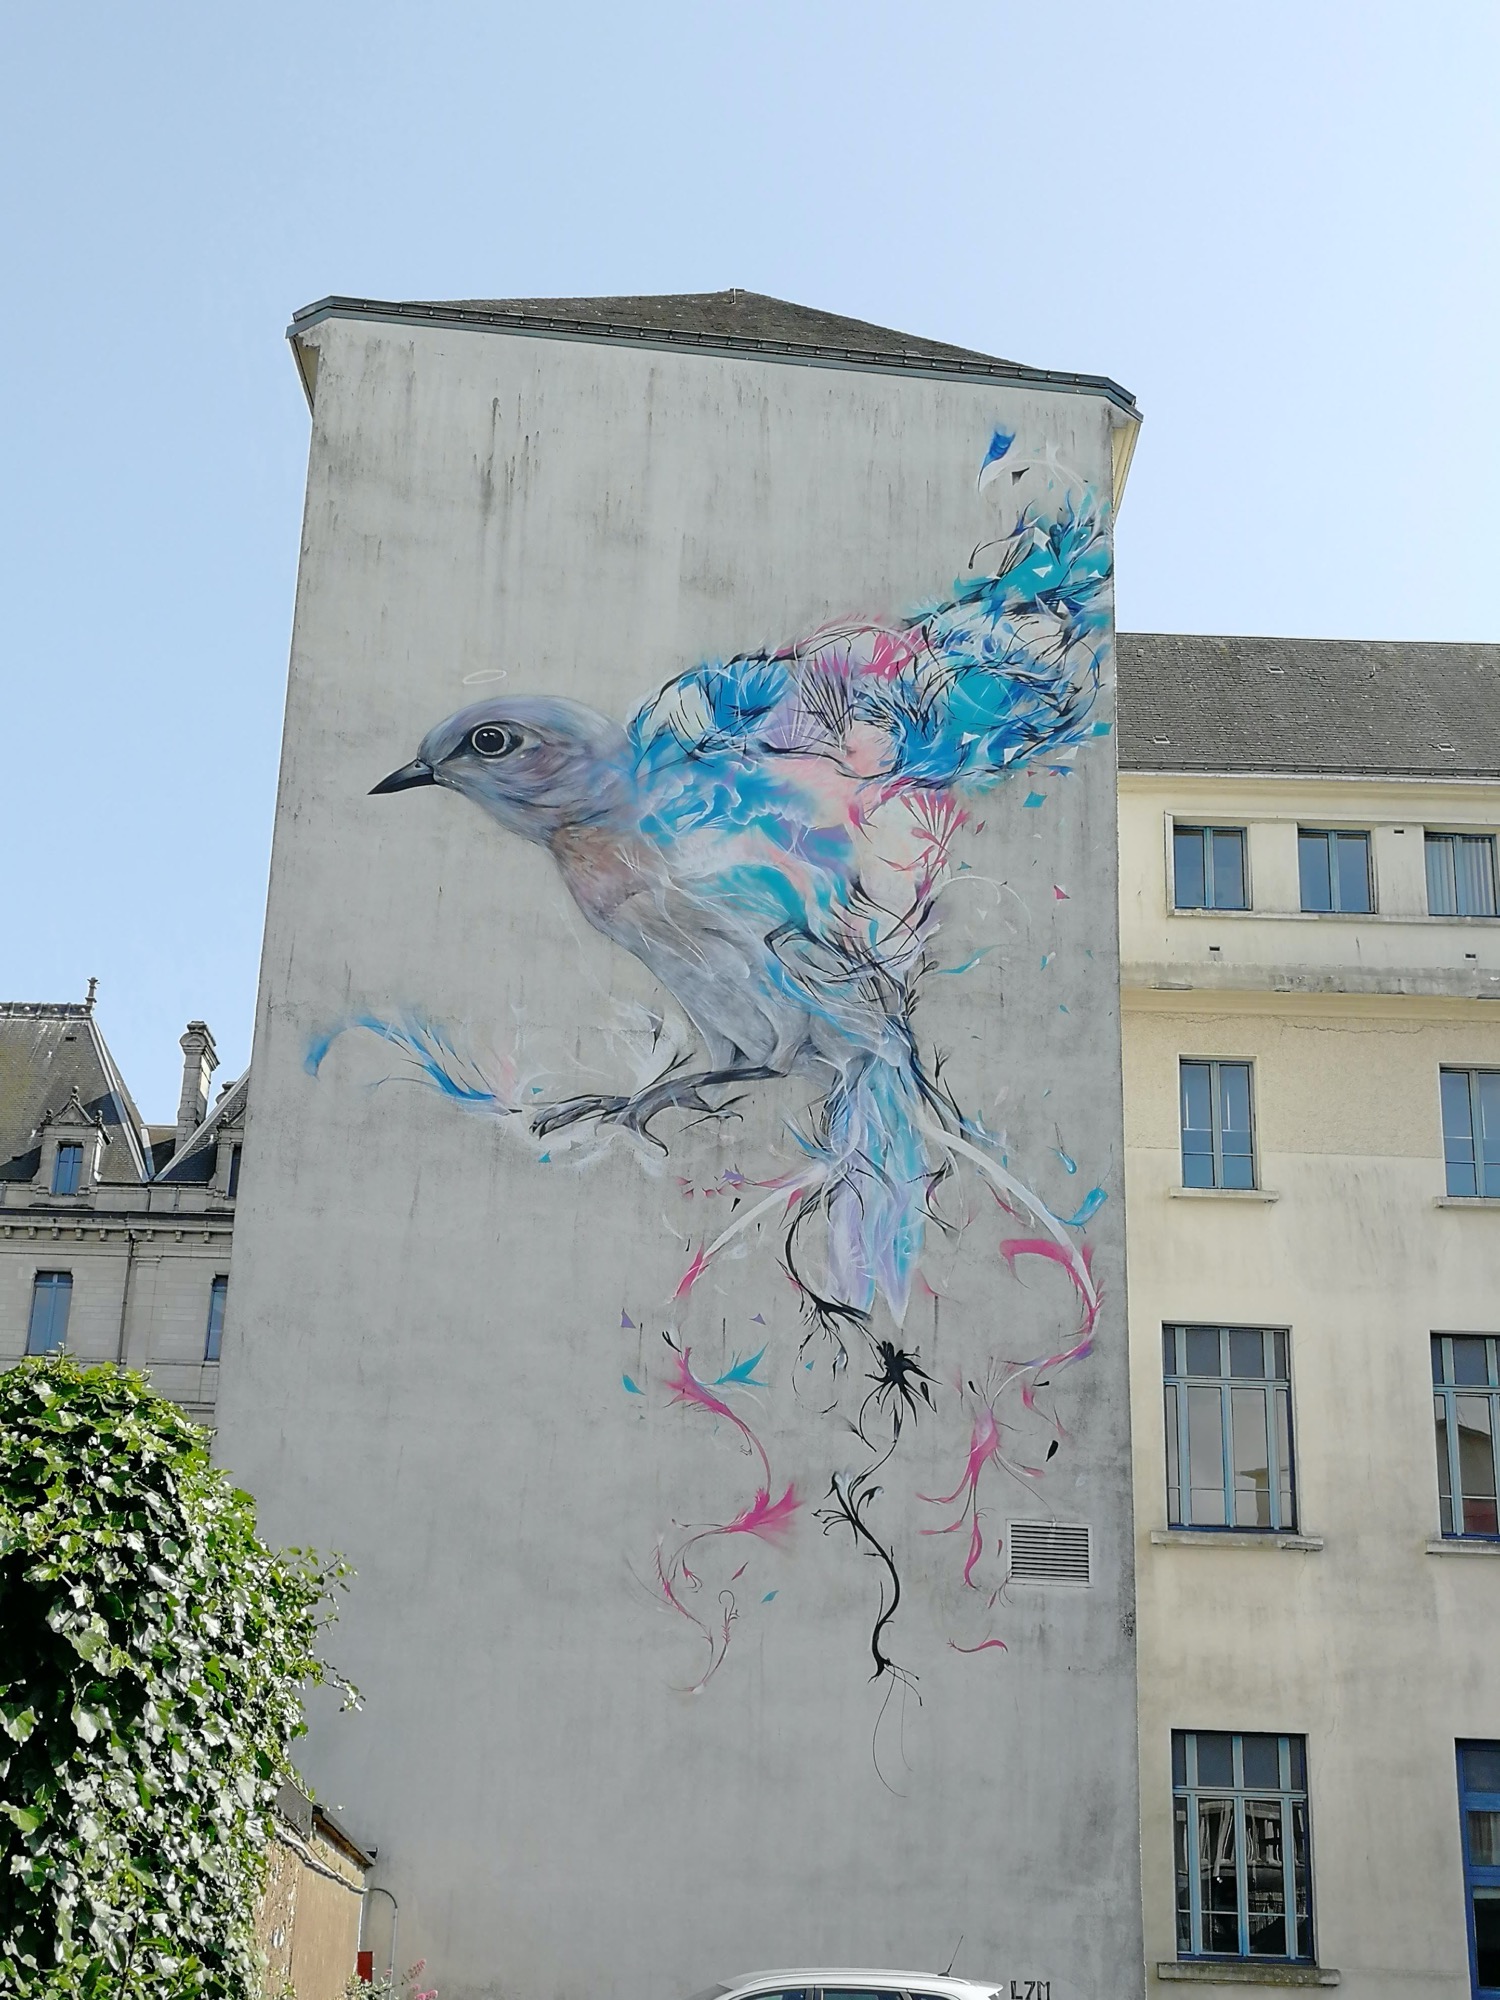 Graffiti 1952  by the artist L7M captured by Rabot in Vannes France